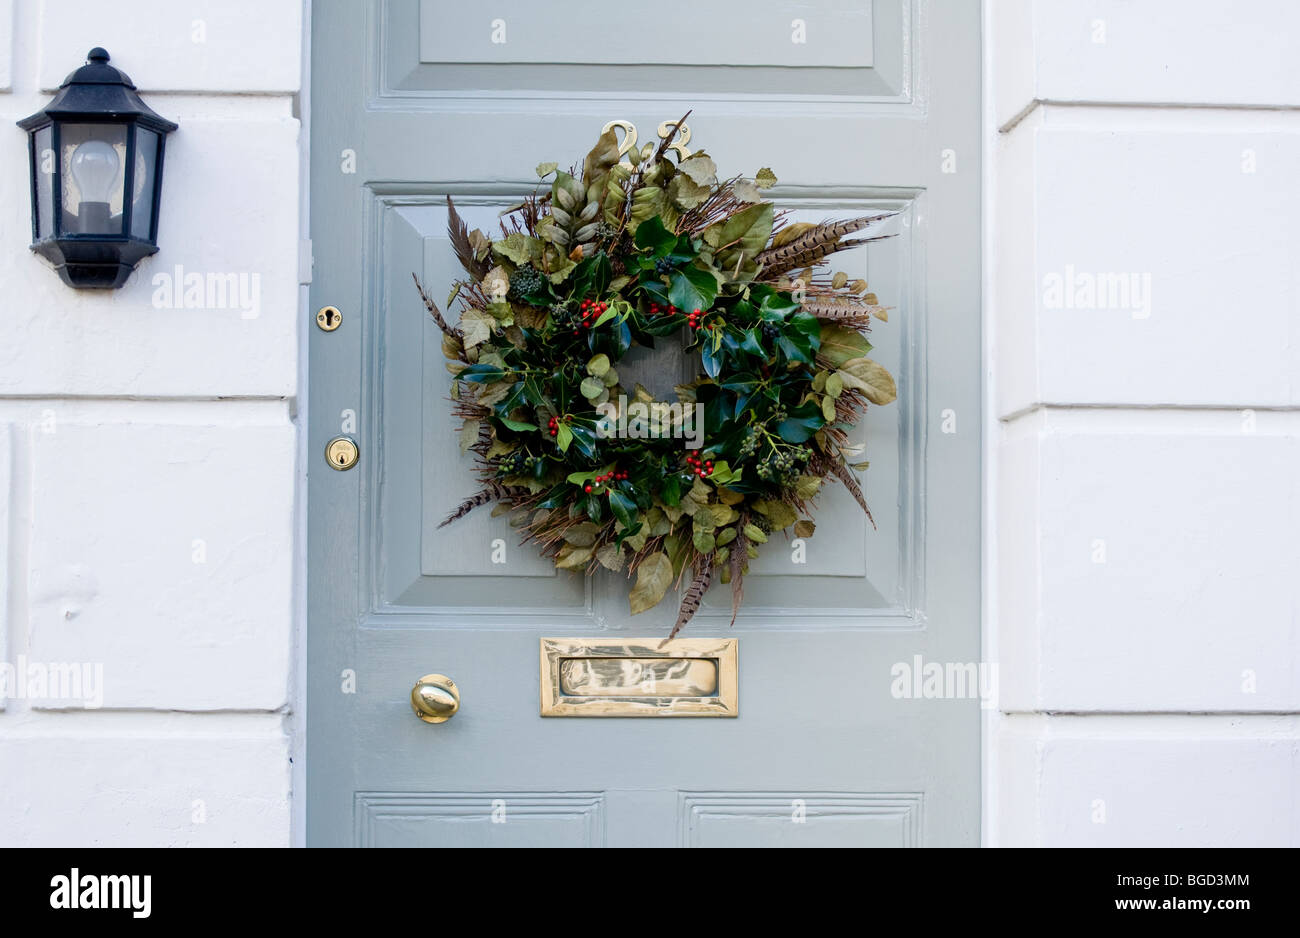 Stylish Regency home, with elegant Christmas Wreath with holly and pheasant feathers. Stock Photo